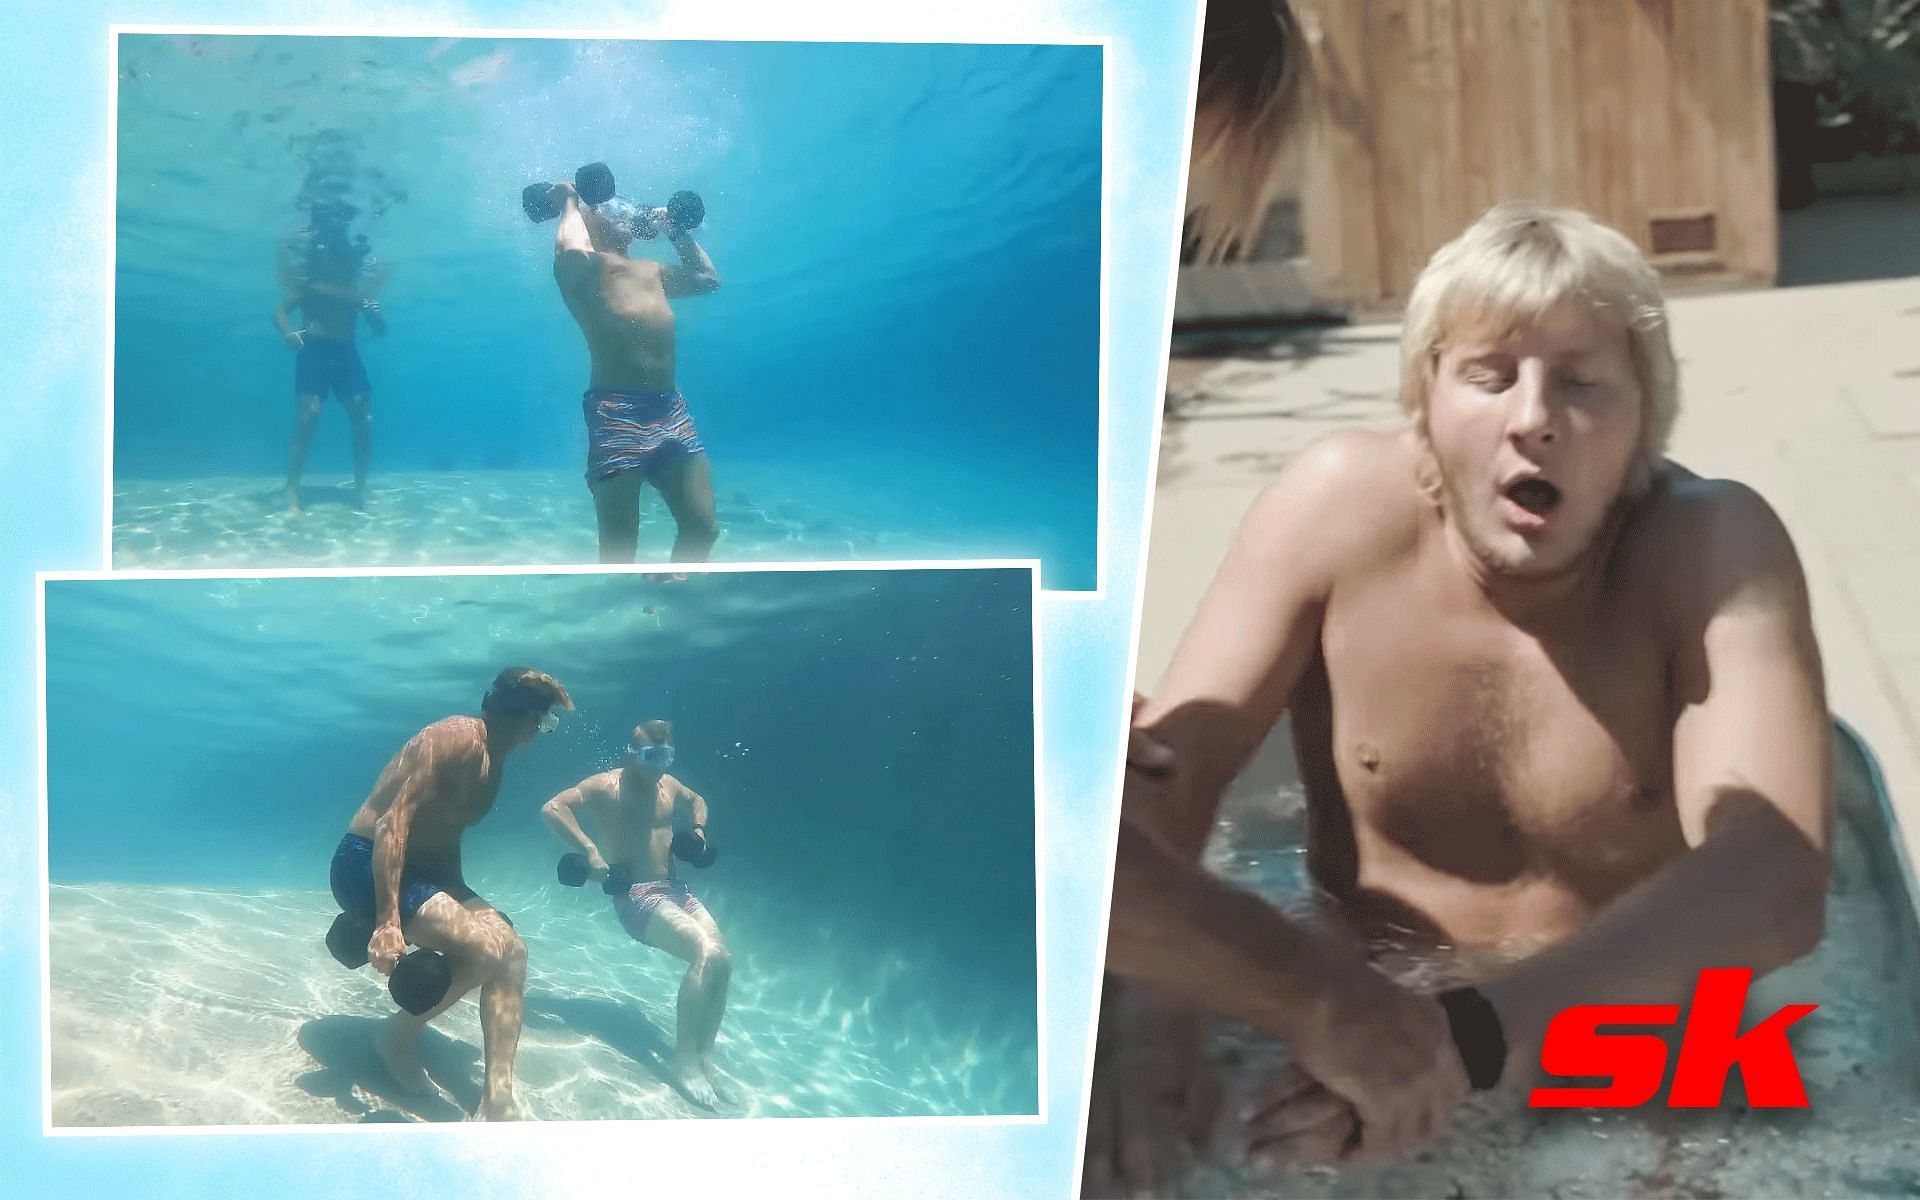 Paddy Pimblett undergoing the XPT training program [Images via Paddy the Baddy | YouTube channel]